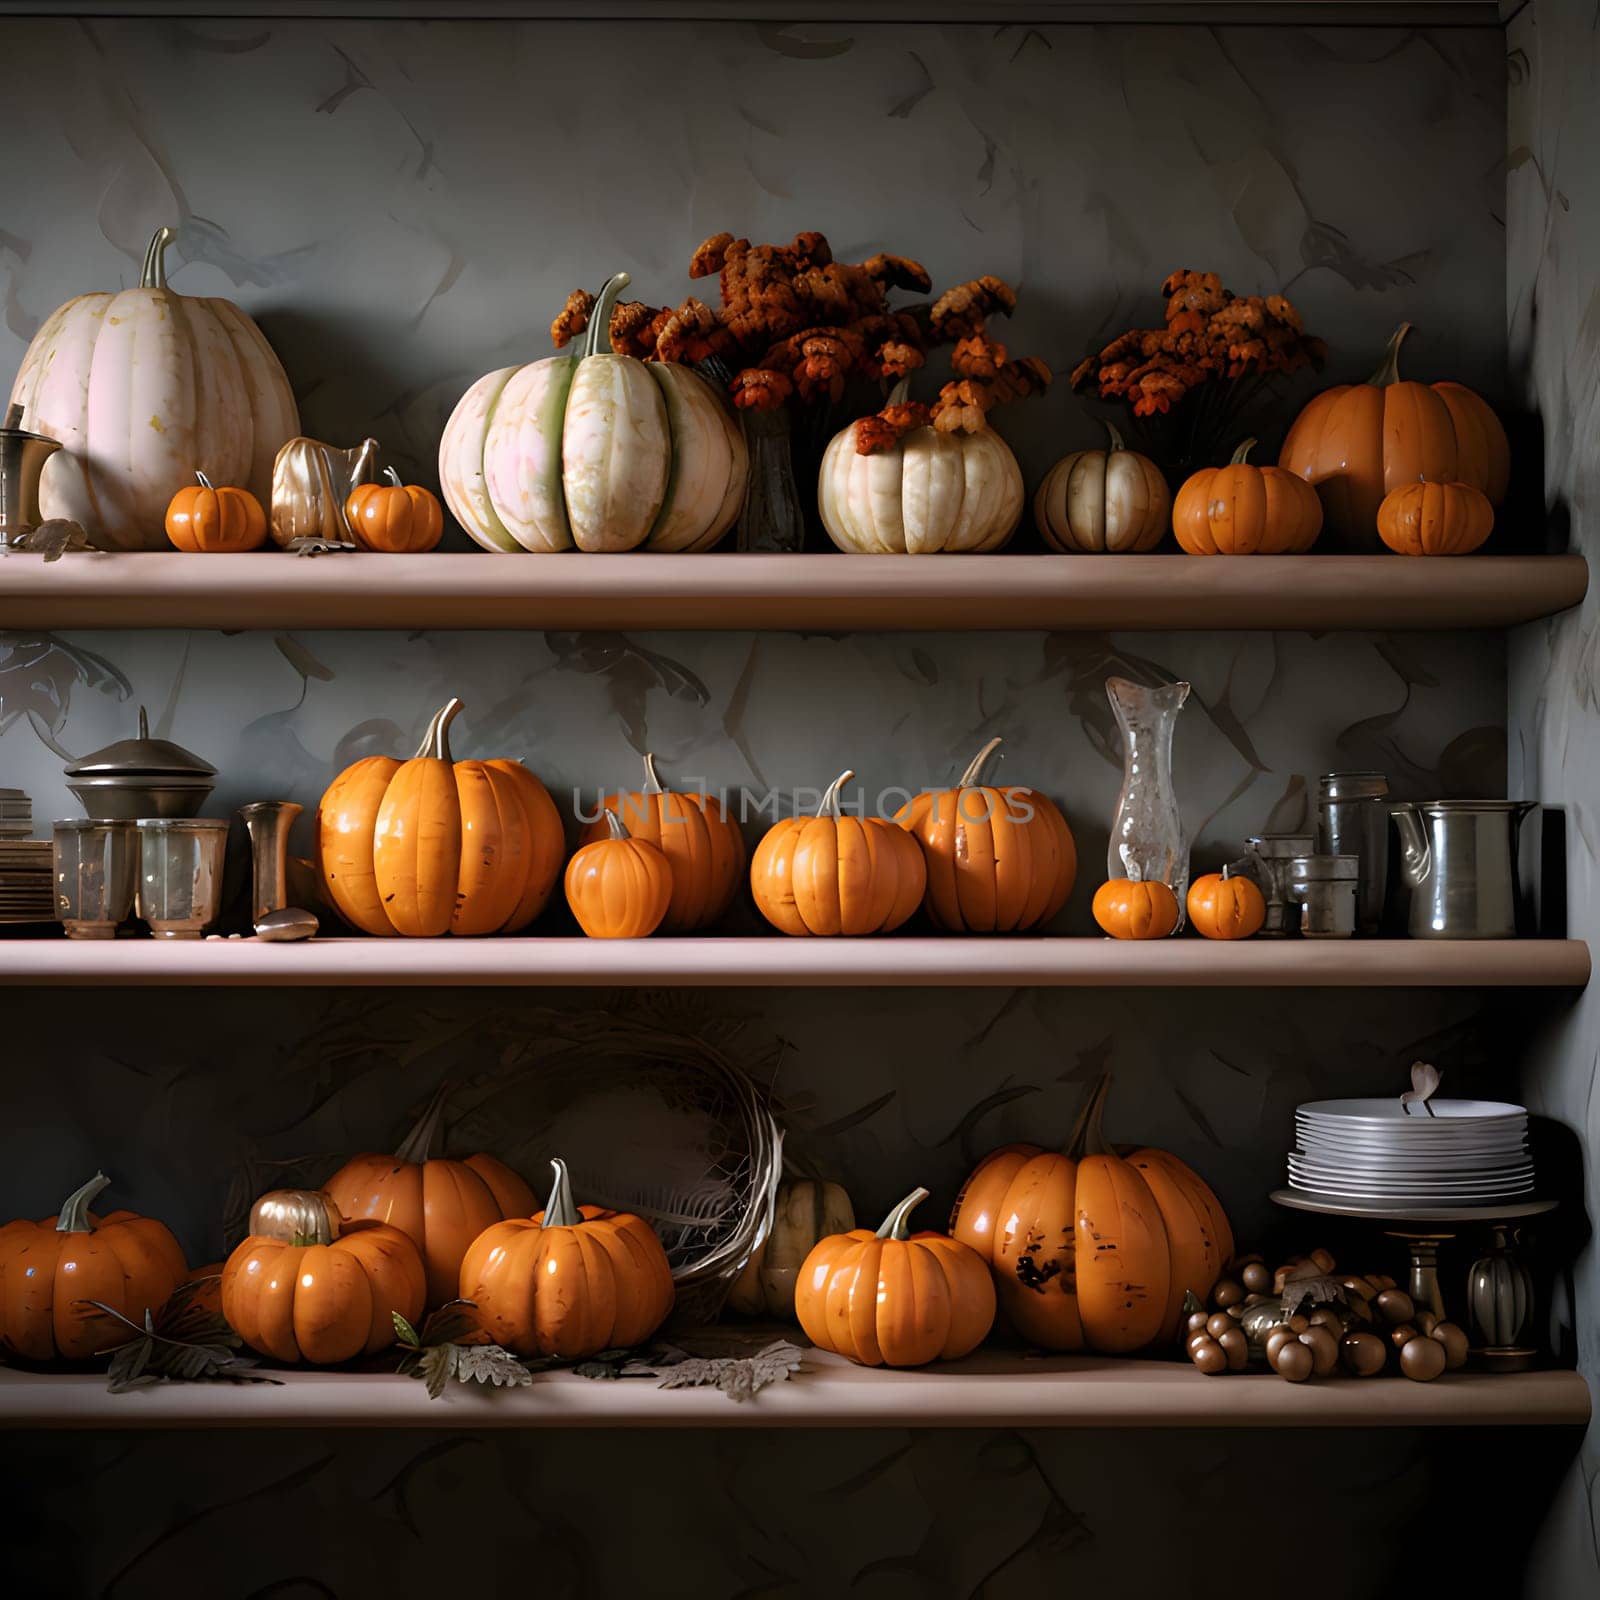 Three shelves in the house, and on them different types, sizes, colors of pumpkins and flowers. Pumpkin as a dish of thanksgiving for the harvest. by ThemesS